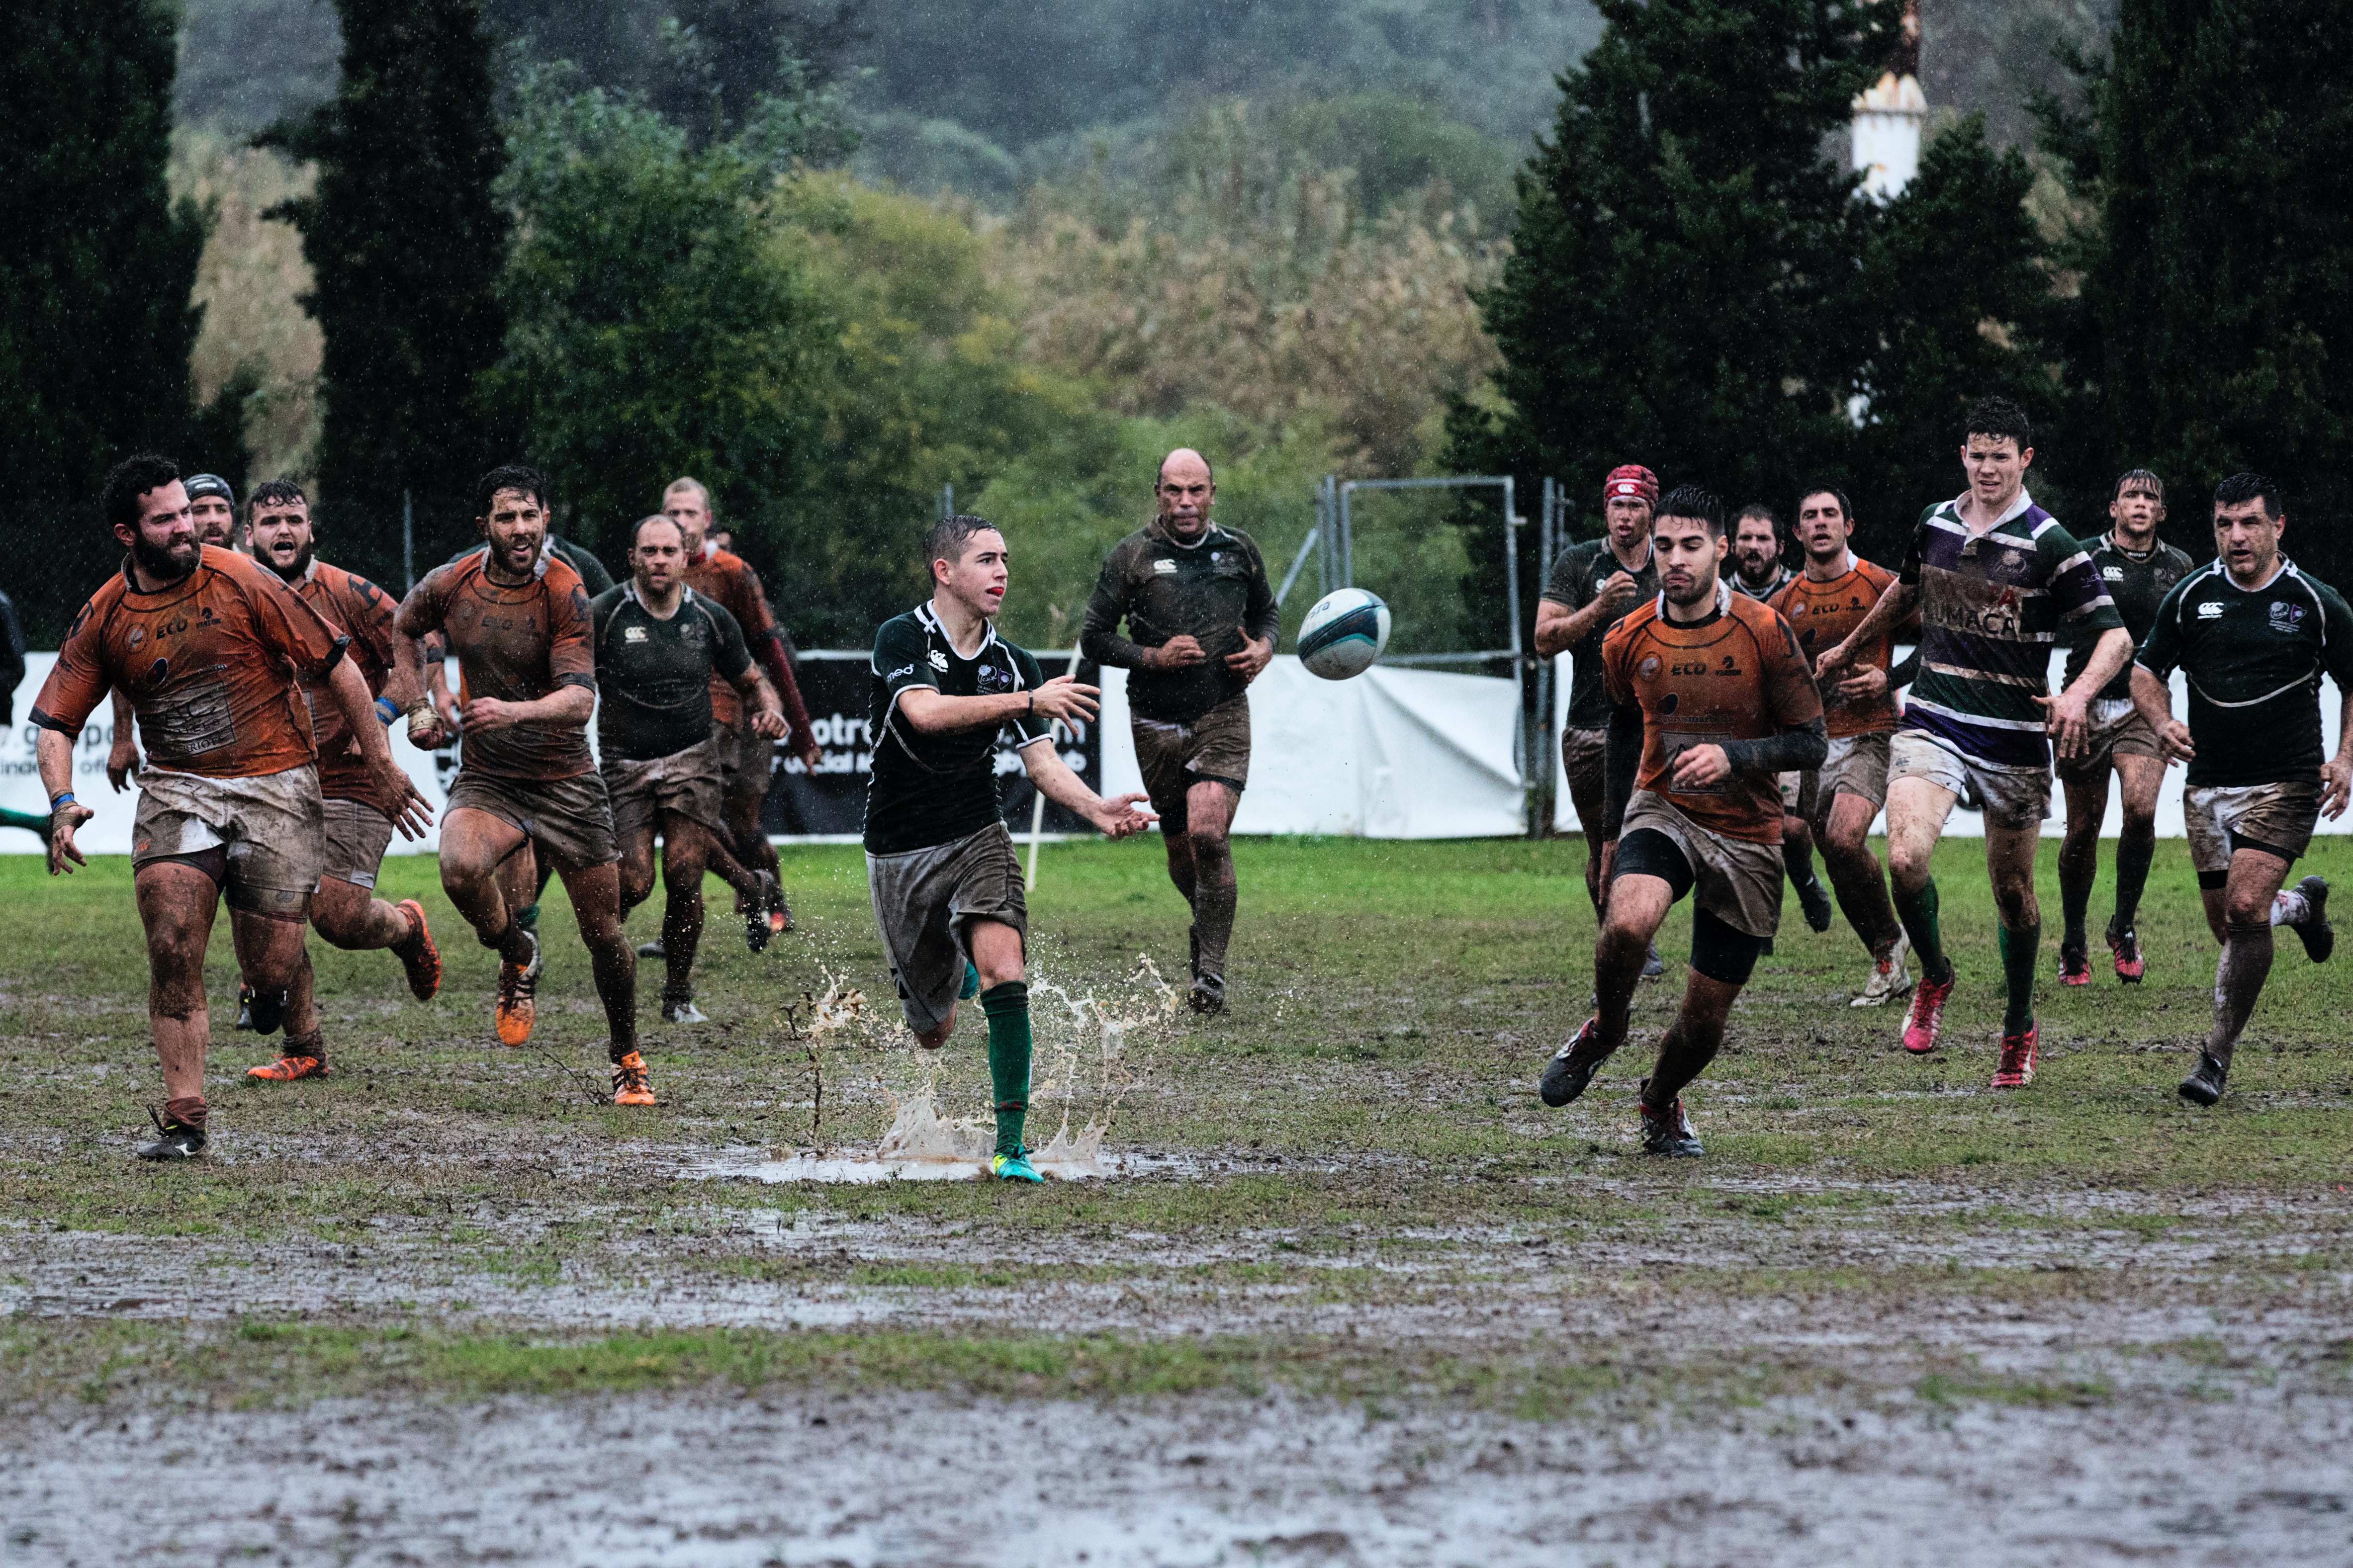 Rugby team playing